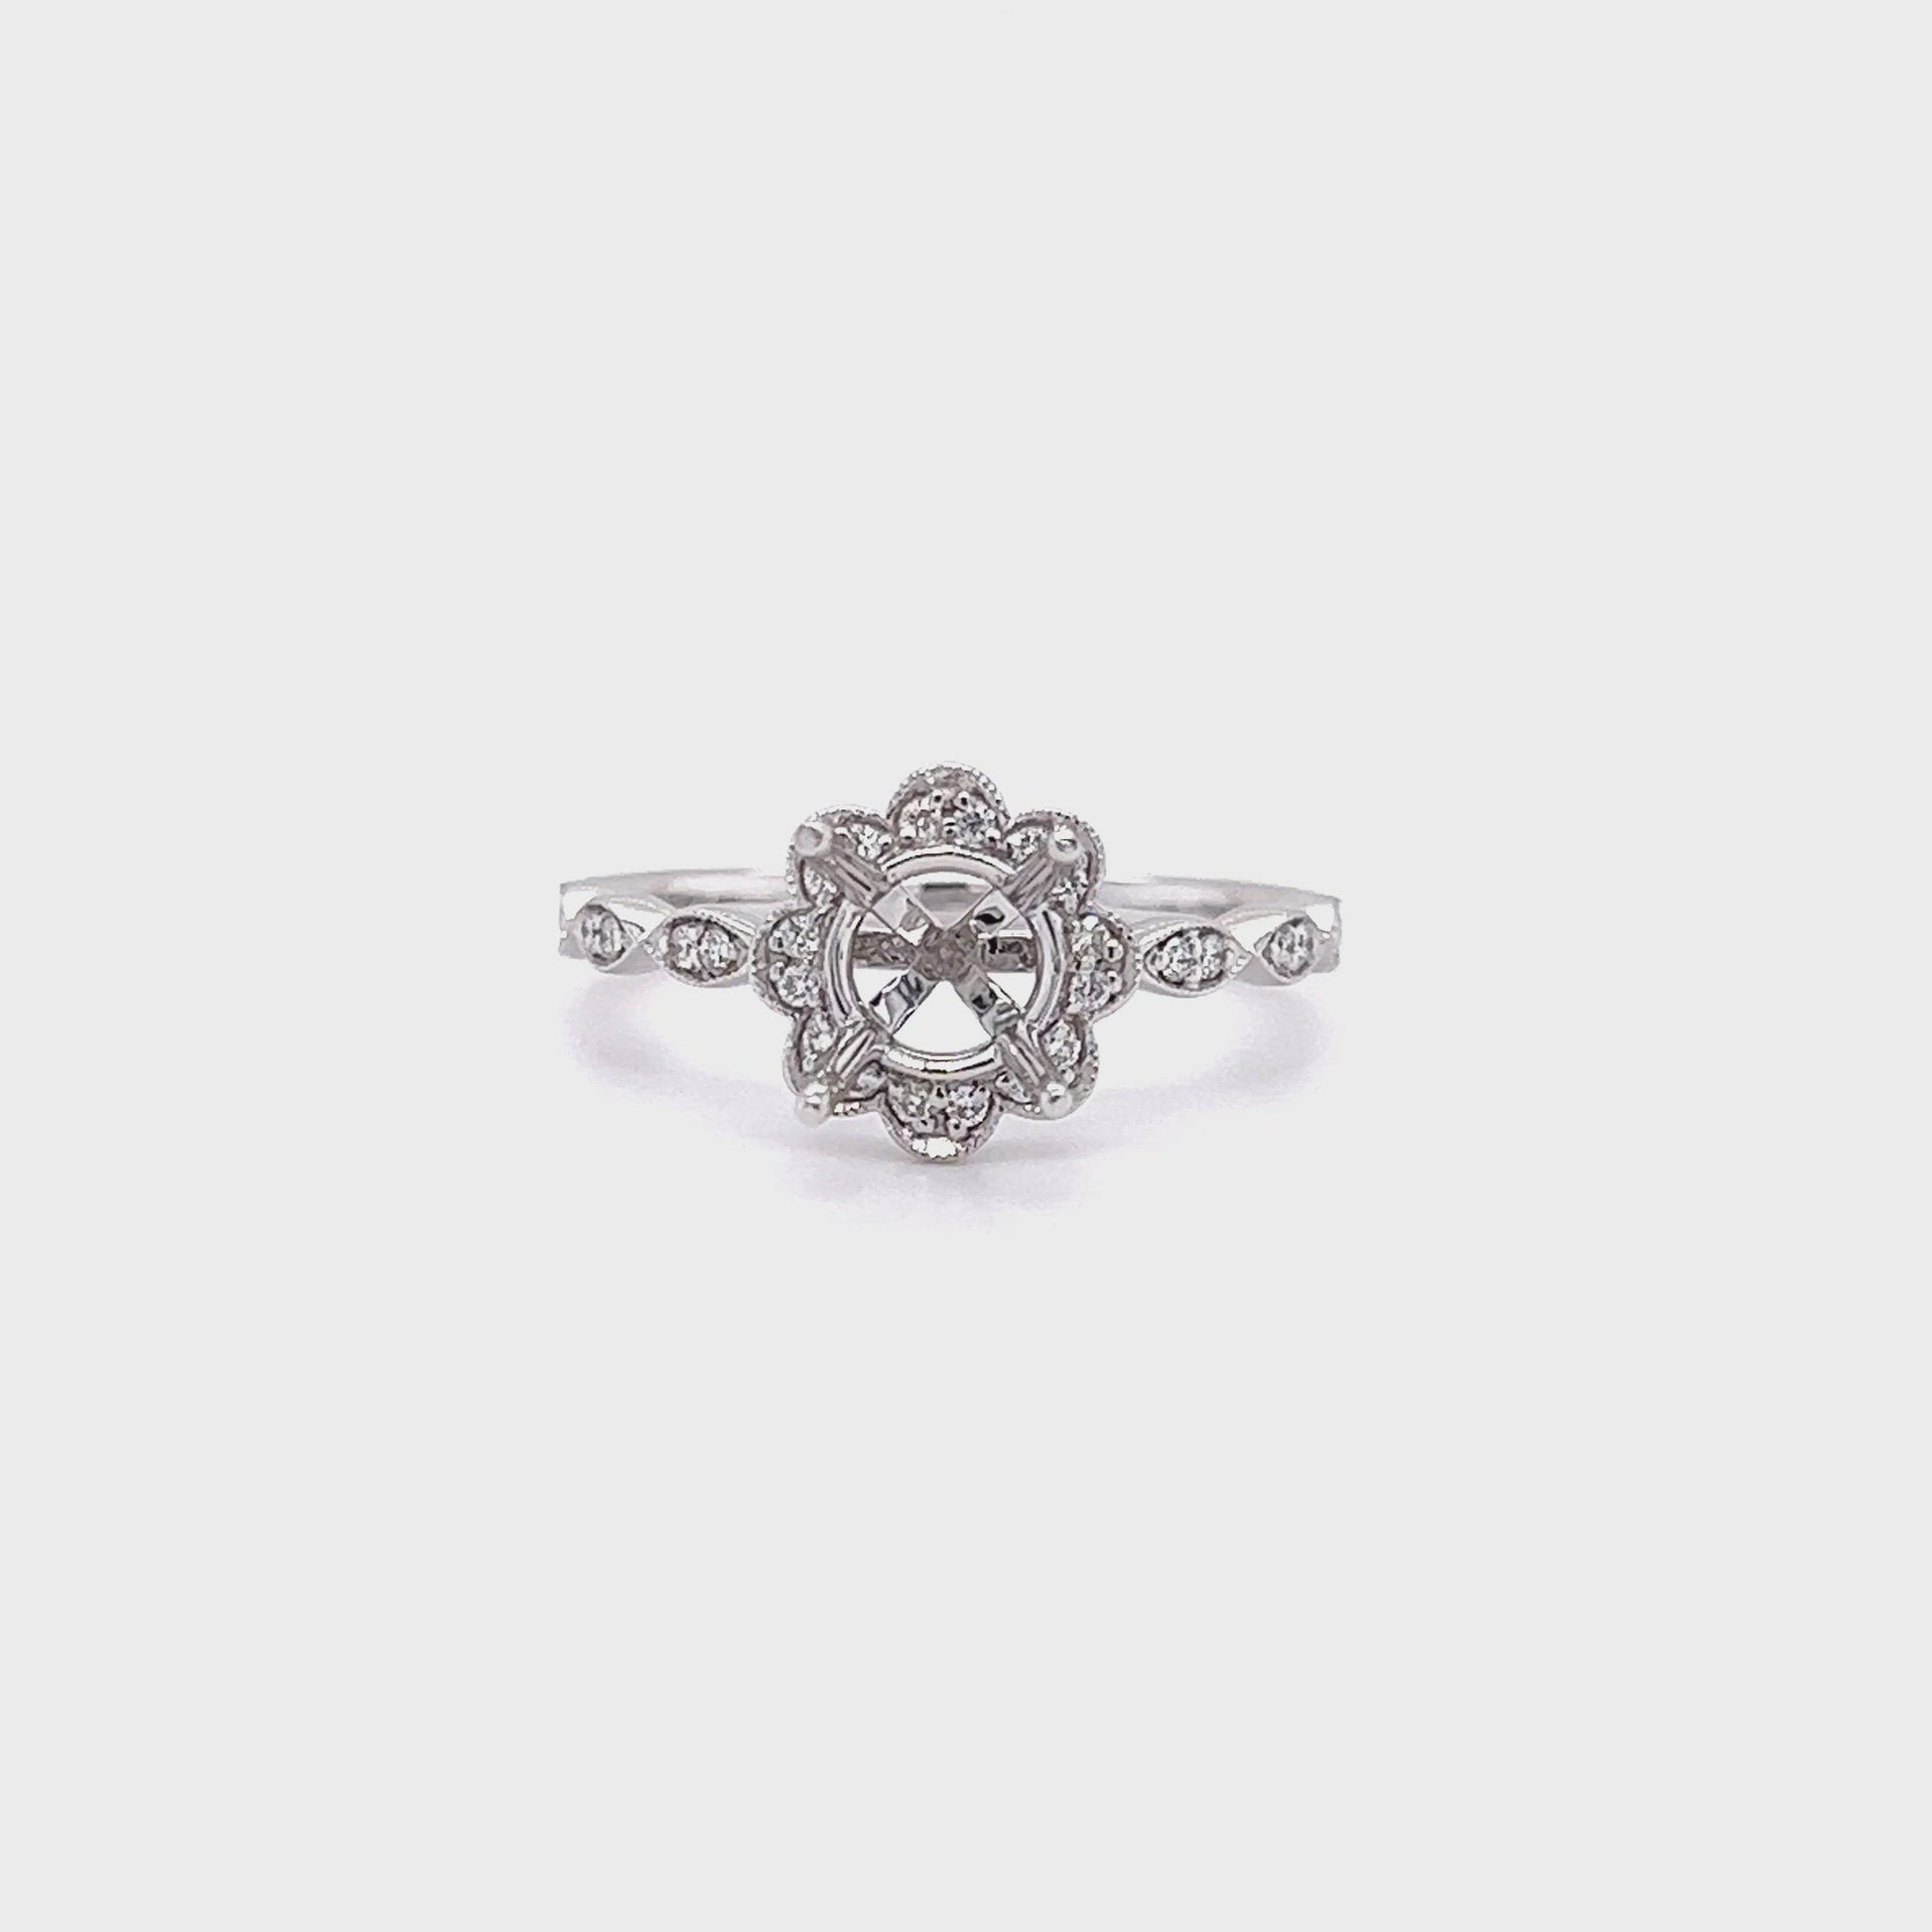 Diamond Ring Setting with Floral Diamond Halo in 14K White Gold Video